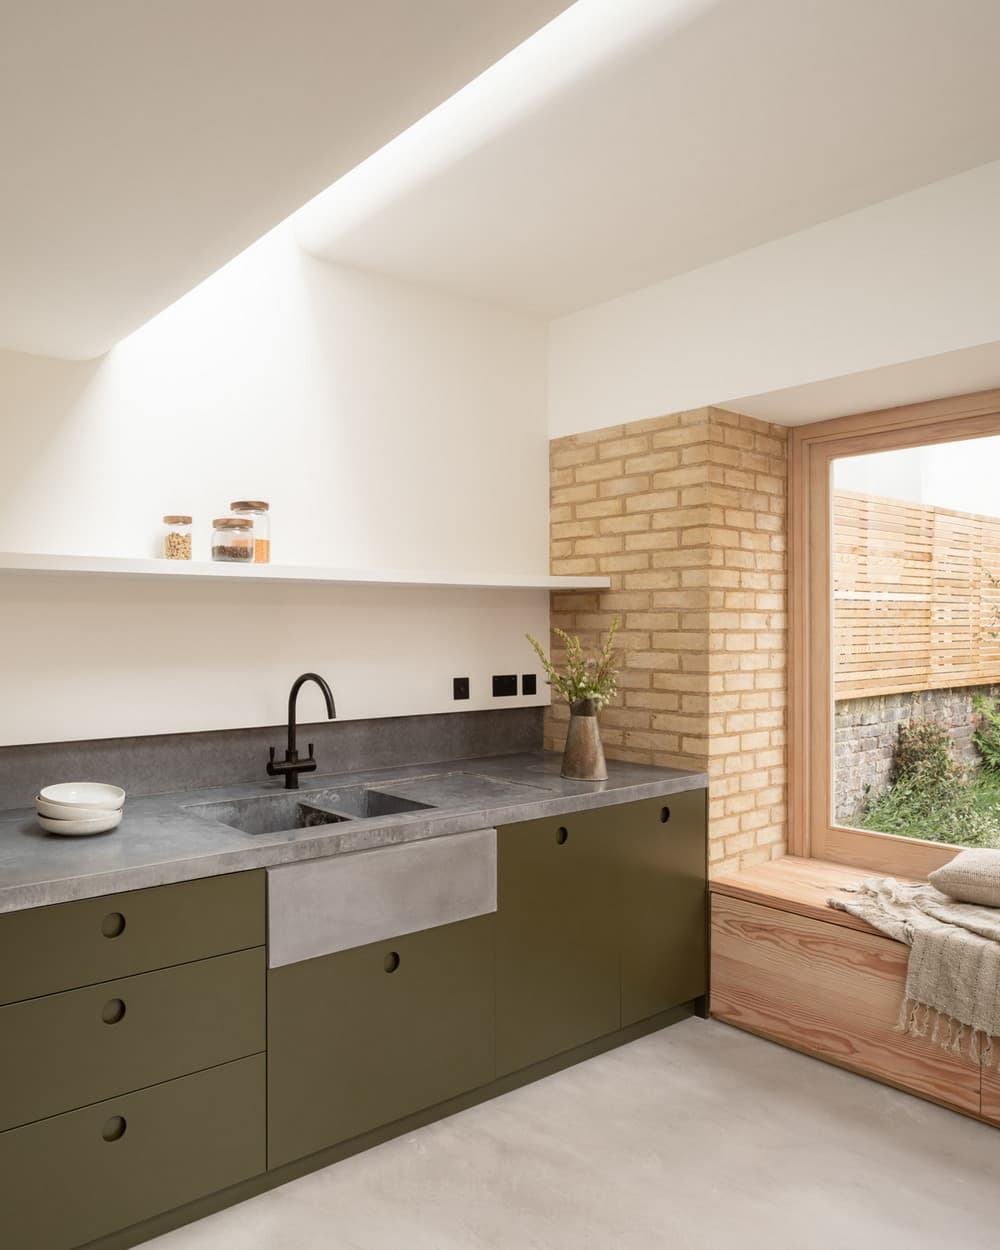 Radical Remodelling to a Victorian Terraced House in Camberwell